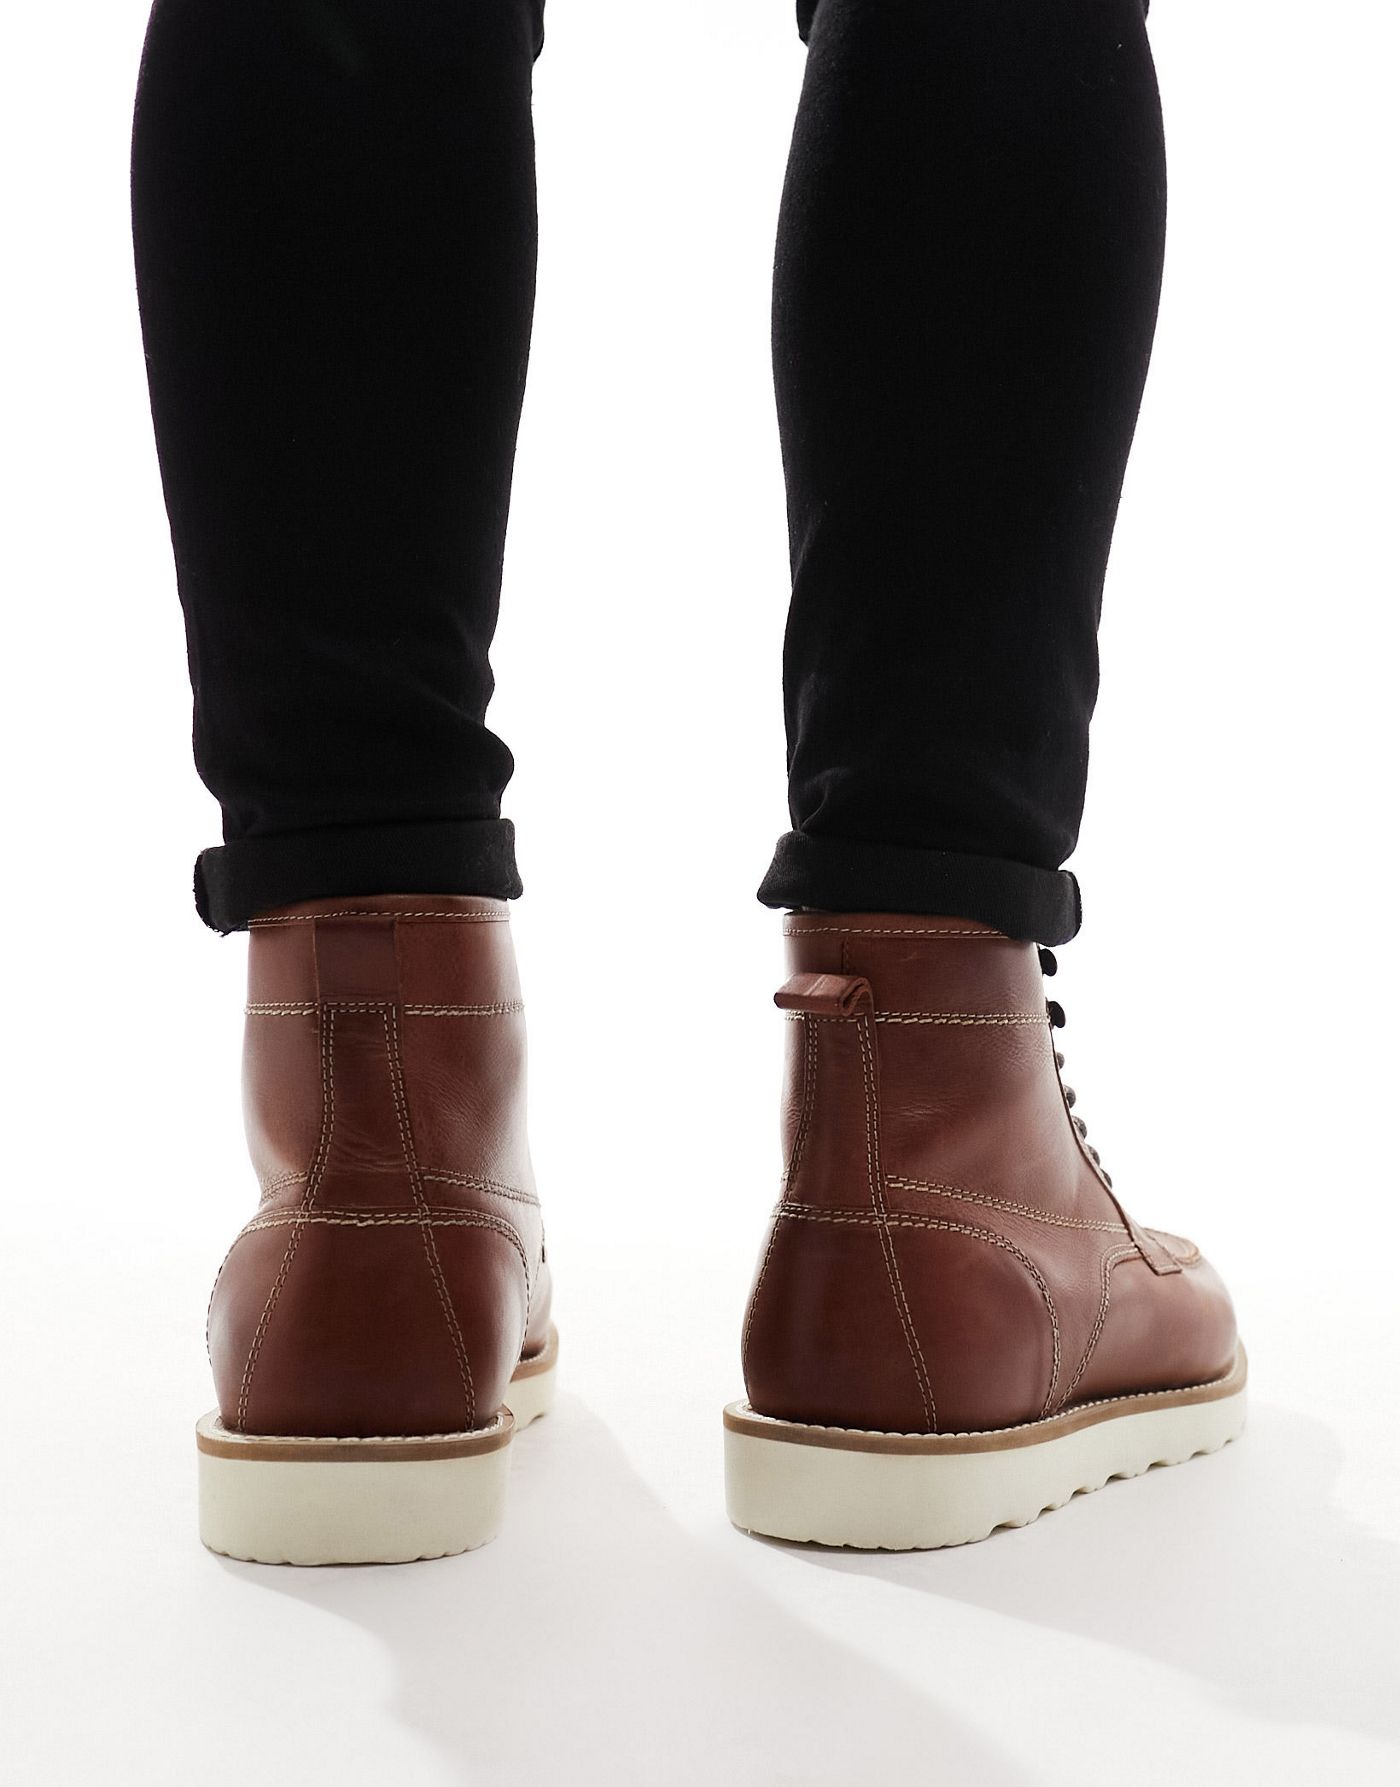 ASOS DESIGN lace up boot in brown leather with contrast sole